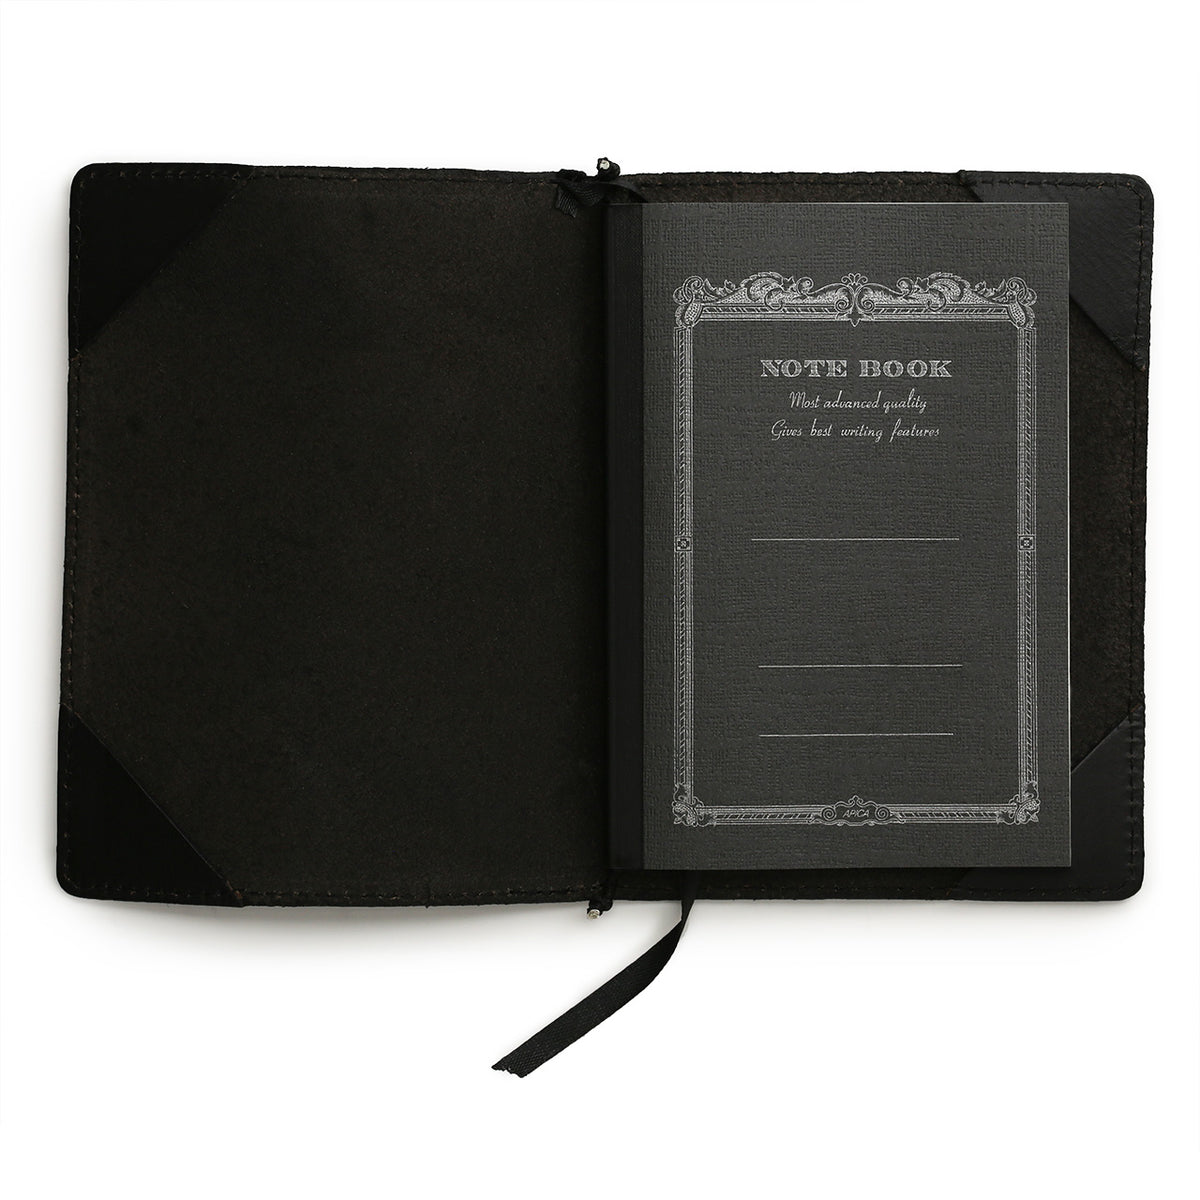 Open view of black leather notebook showing the black Apica A6 notebook and ribbon bookmark